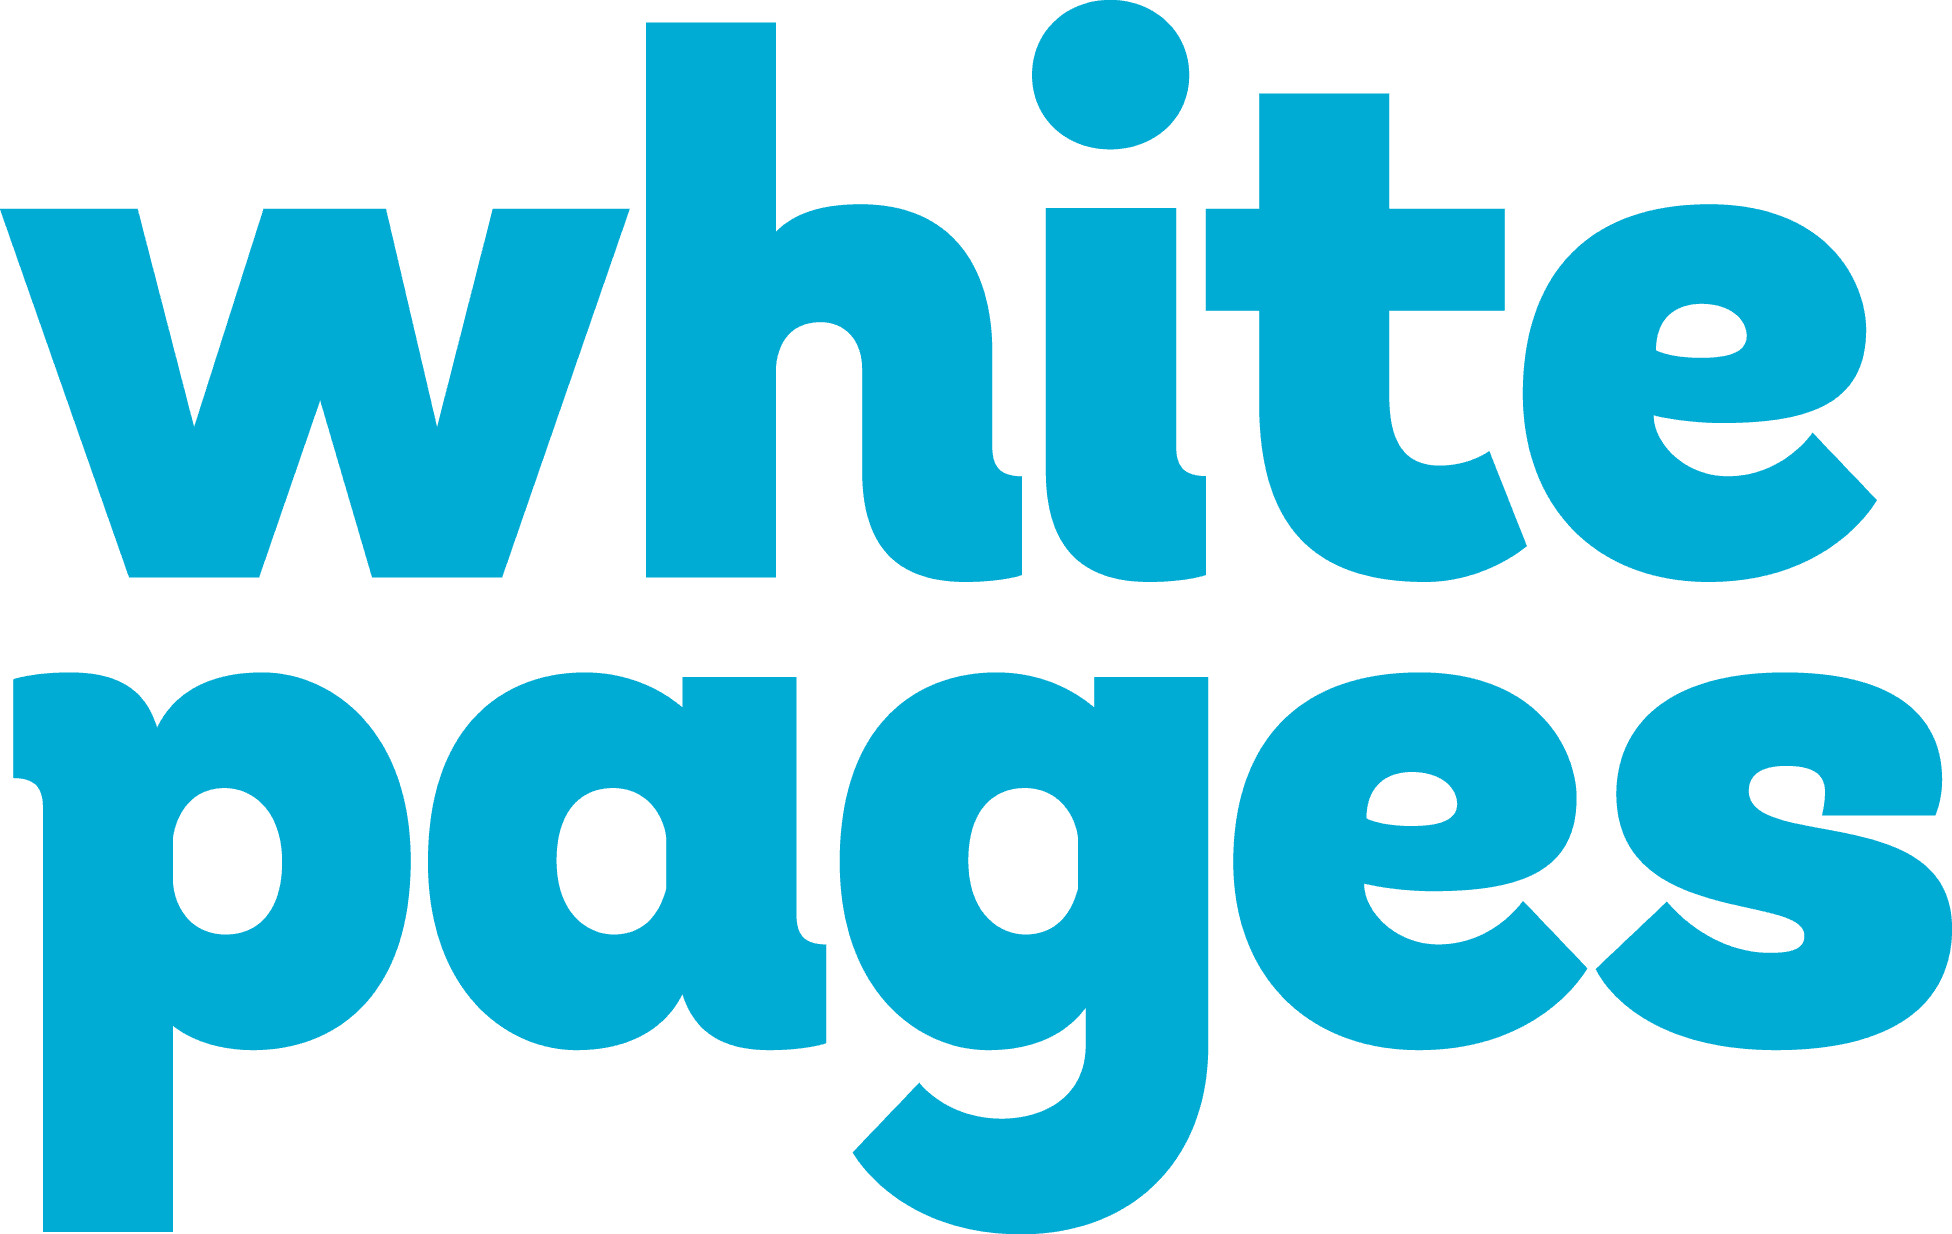 white pages